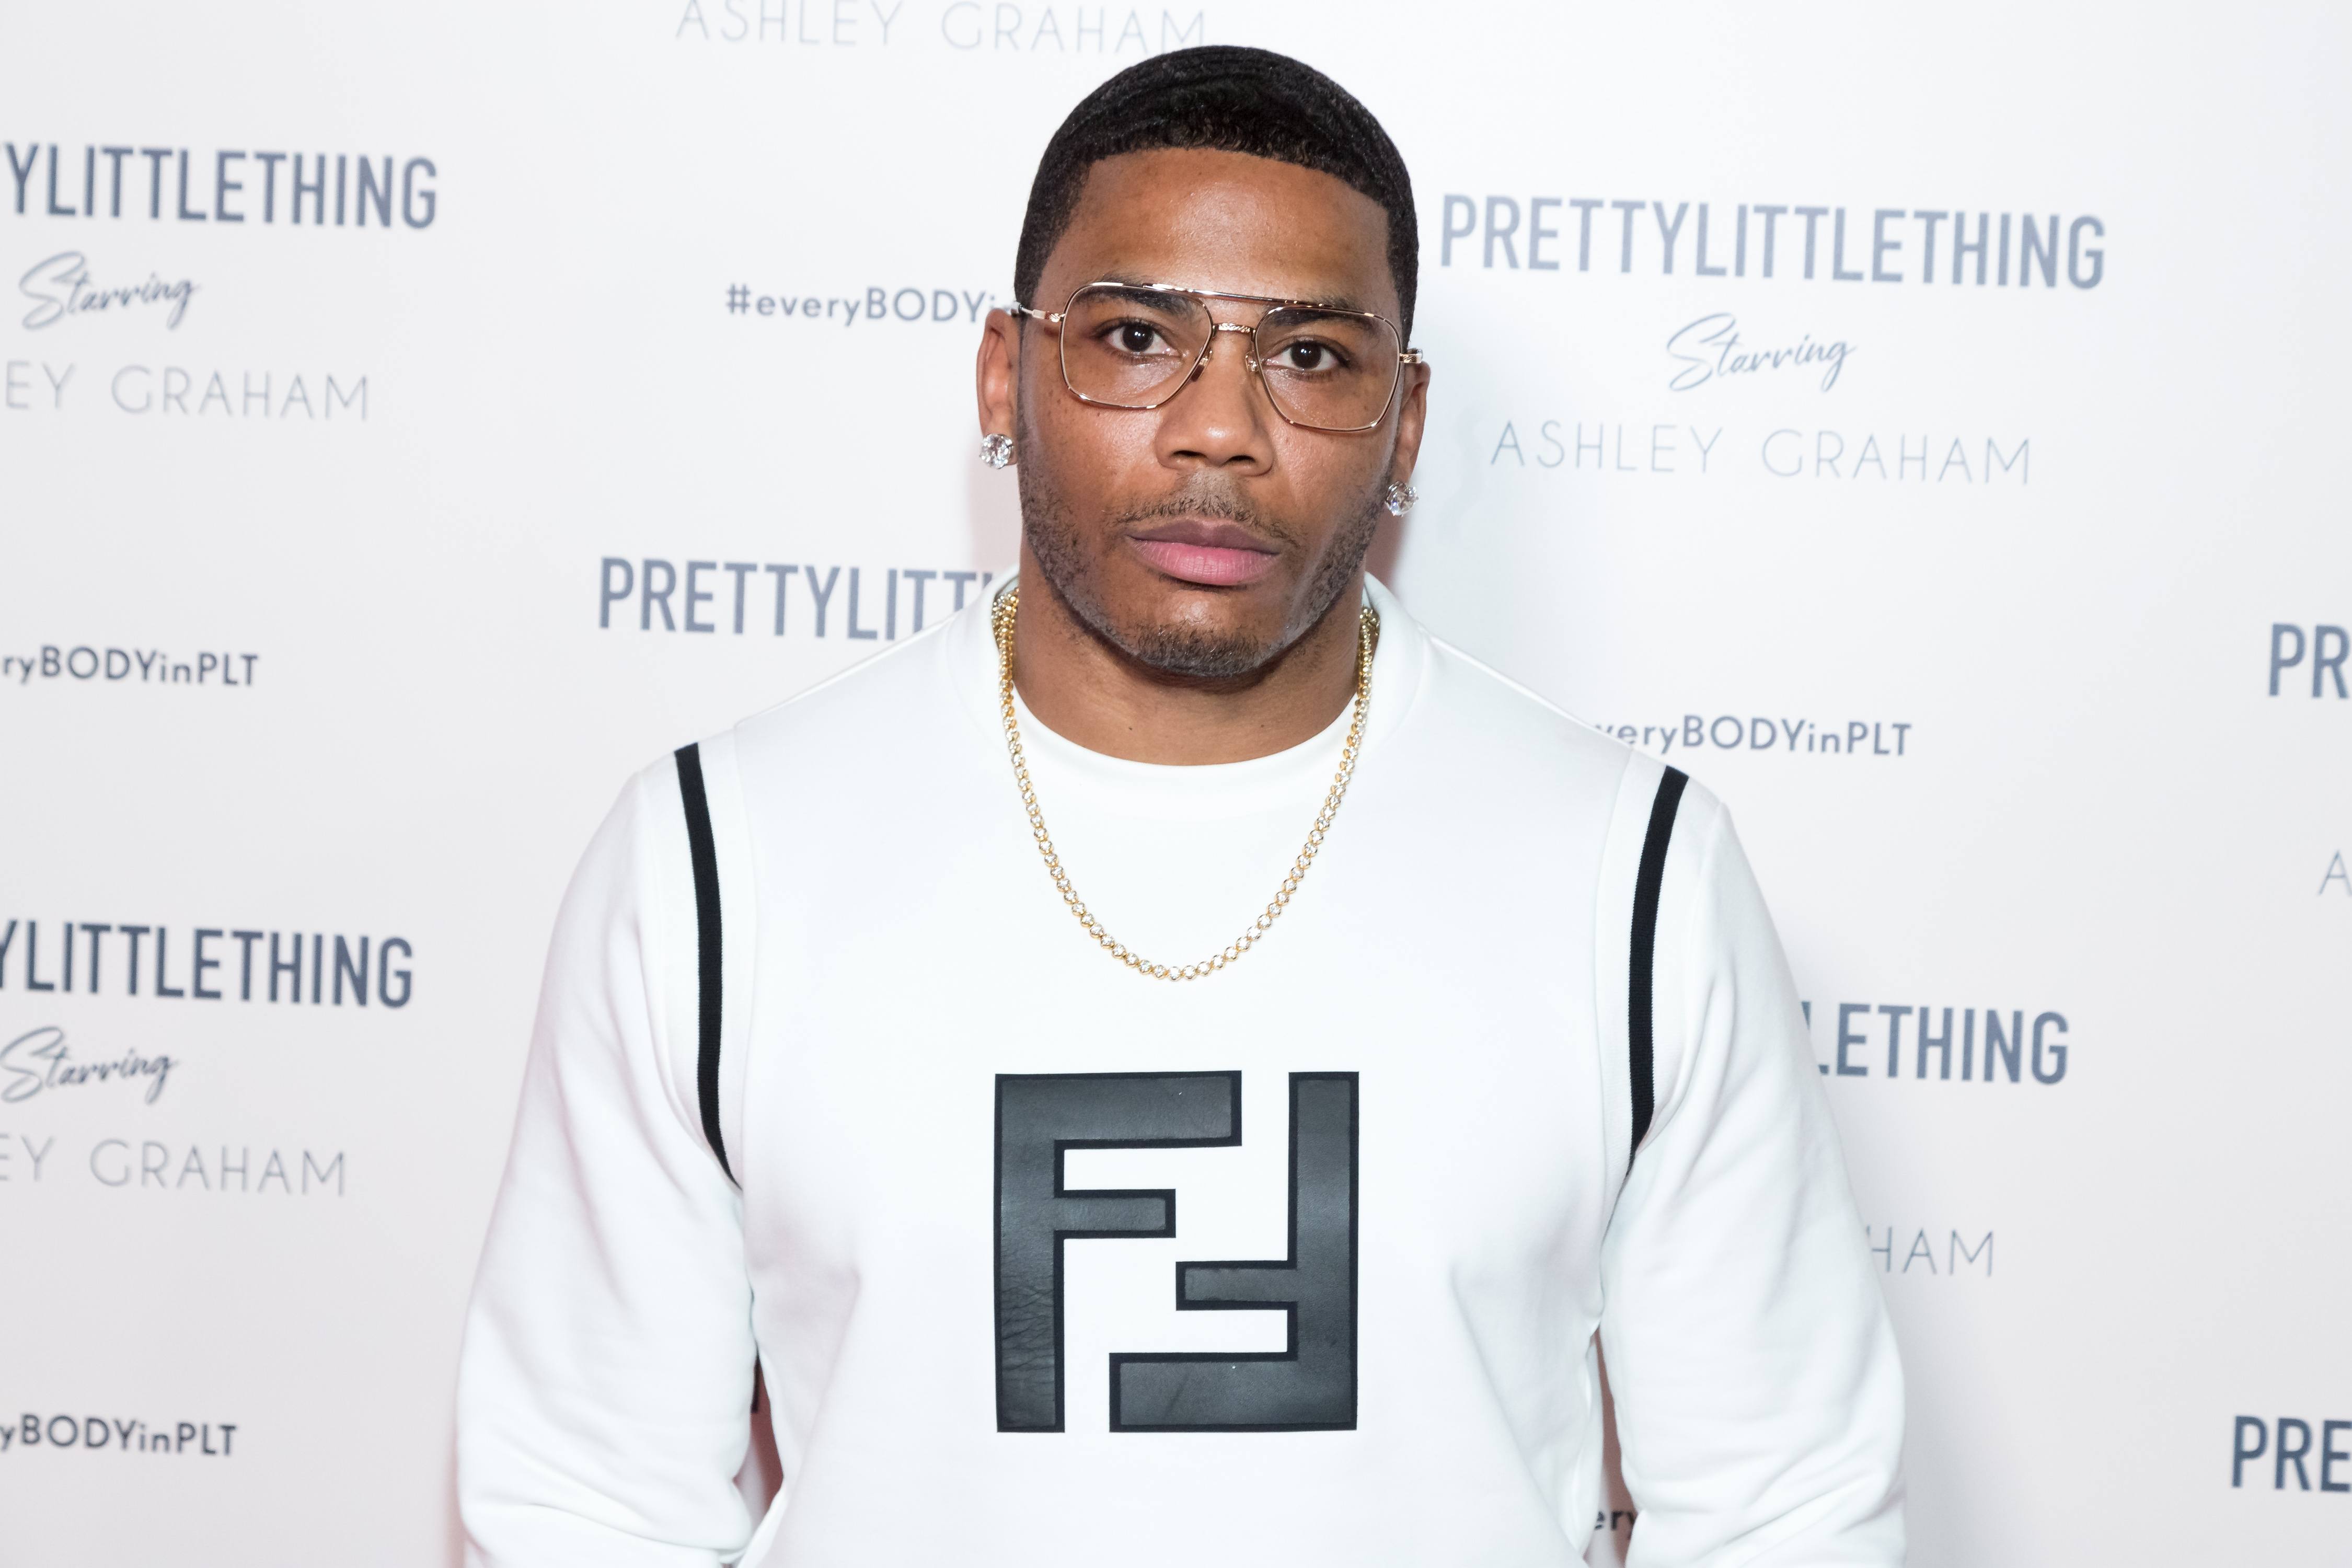 Nelly Issues Apology For X-Rated Video Posted On His Instagram Account